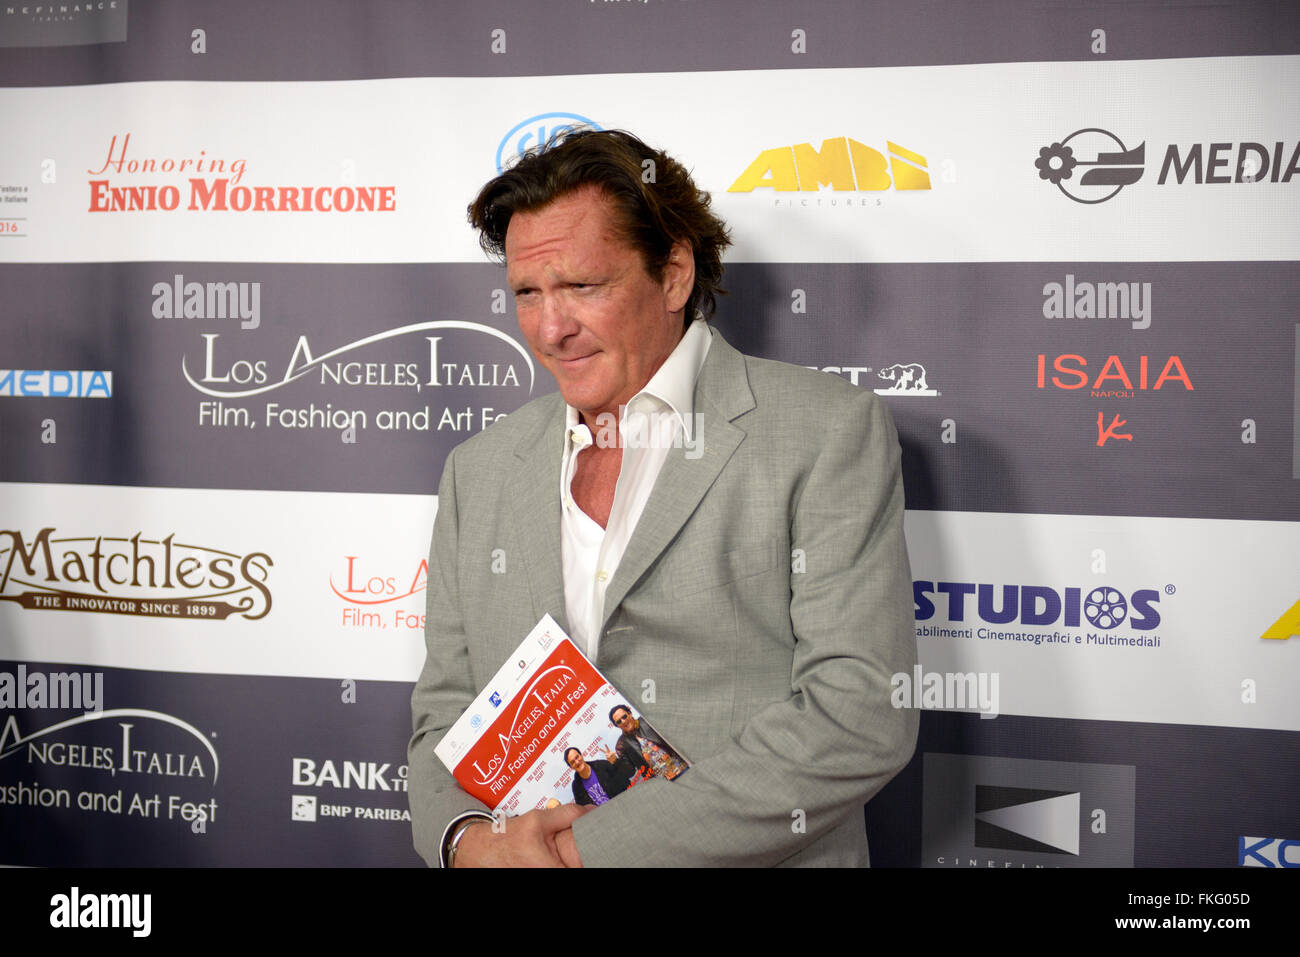 FEBRUARY 22, 2016: The actor Michael Madsen at the Los Angeles Italian Film Festival. Stock Photo